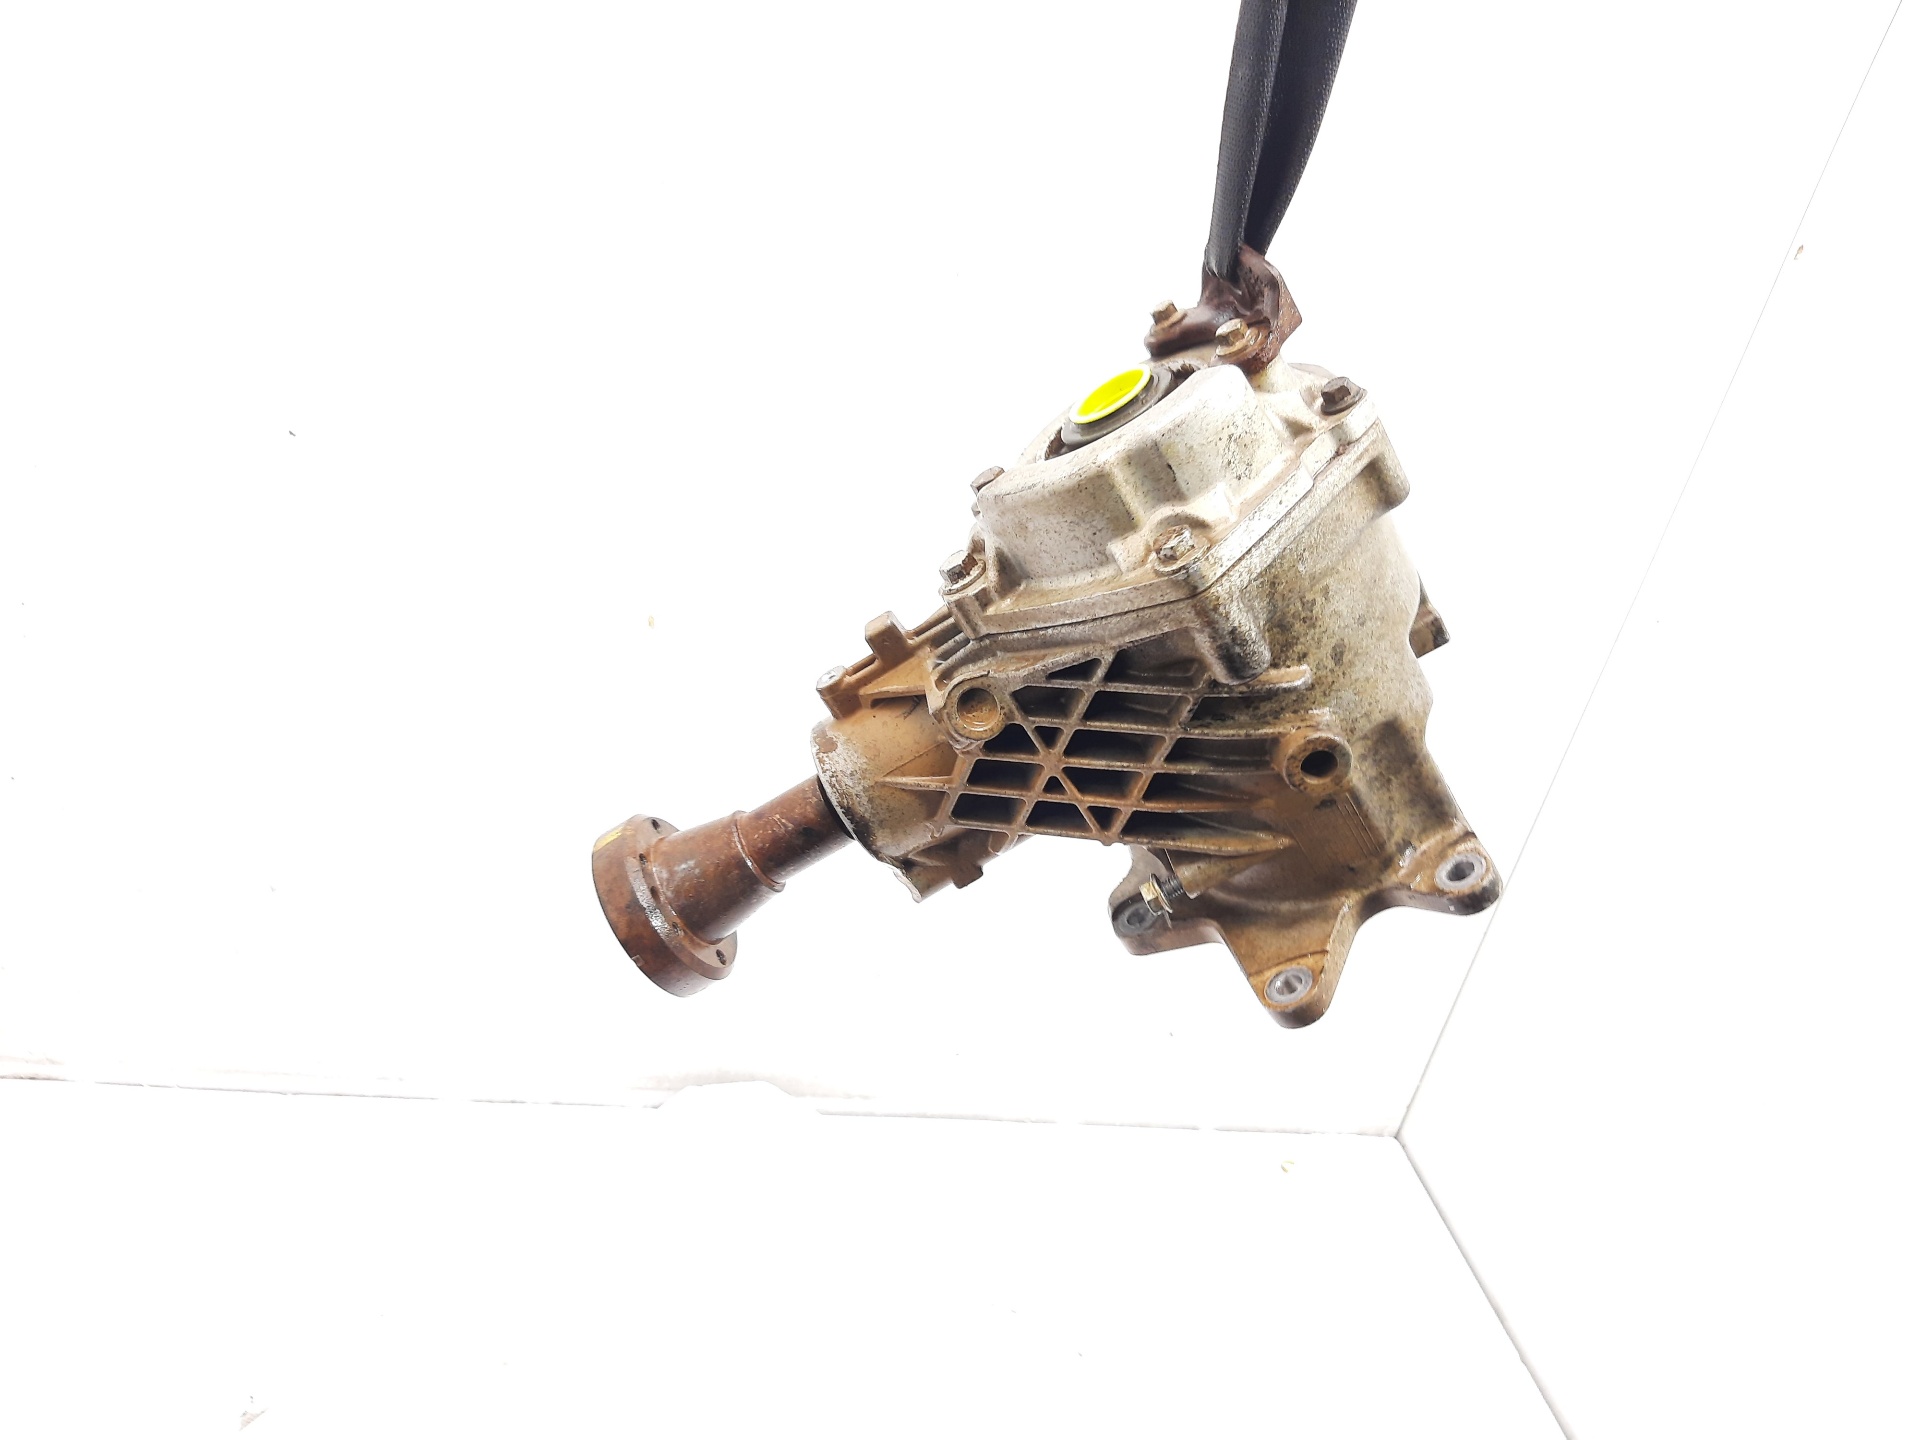 FORD FOCUS C-MAX Front Transfer Case 8V417L486AD, 6VELOCIDADES 23078227